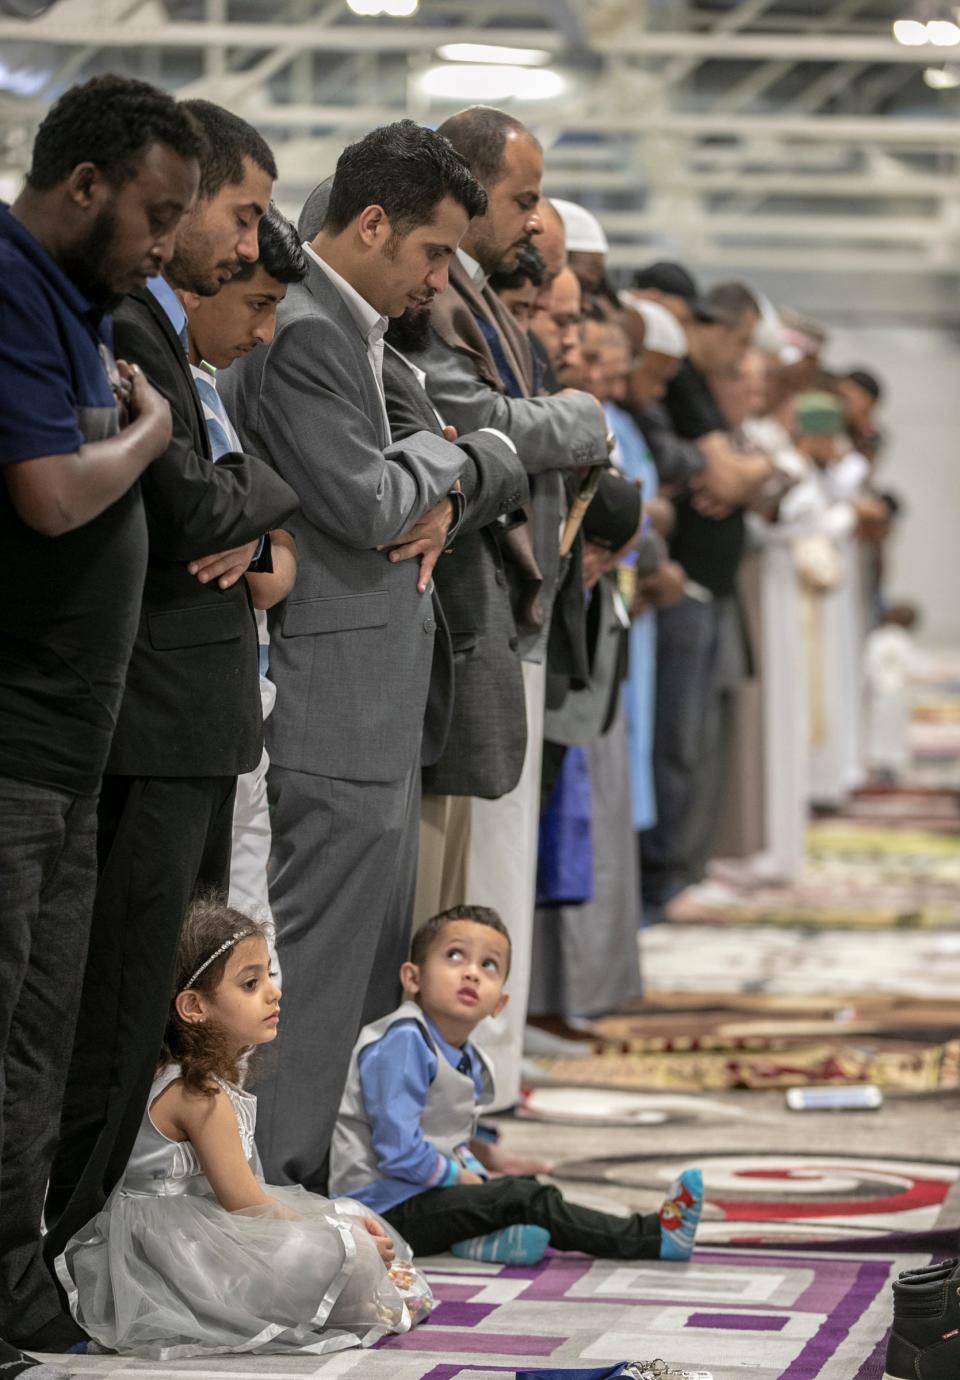 Children watch their fathers pray during an event called Eid al-Fitr, which helps mark the end of Ramadan, a fast for Muslims during daylight hours, and lasting one lunar cycle, at the Indiana State Fairgrounds, Indianapolis, Tuesday, June 4, 2019. The event, drawing a few thousand Muslims, is one of several community ones in the area designed to bring various Islamic communities together. 